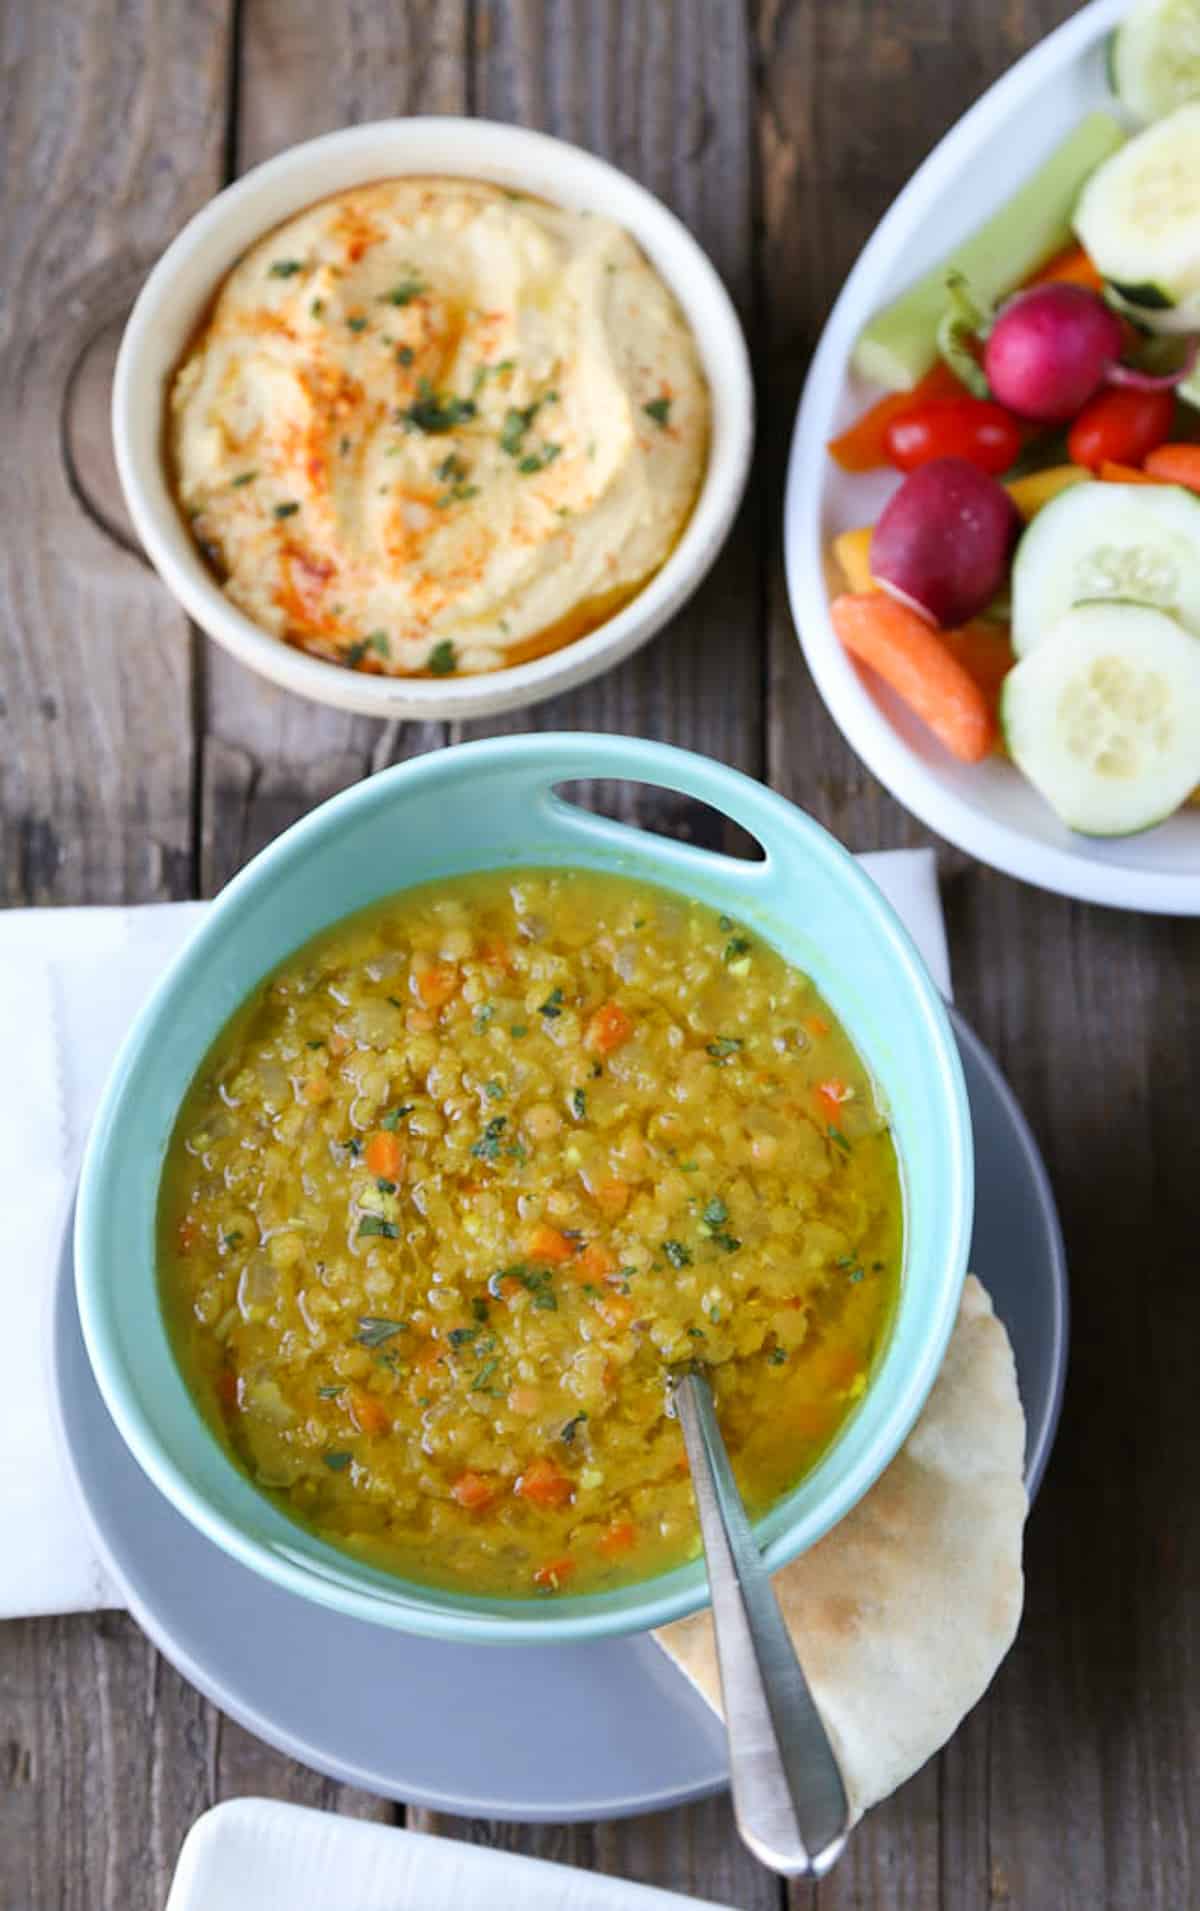 lebanese lemon lentil soup in a turquoise bowl on a wooden table with a side of hummus and raw veggies.